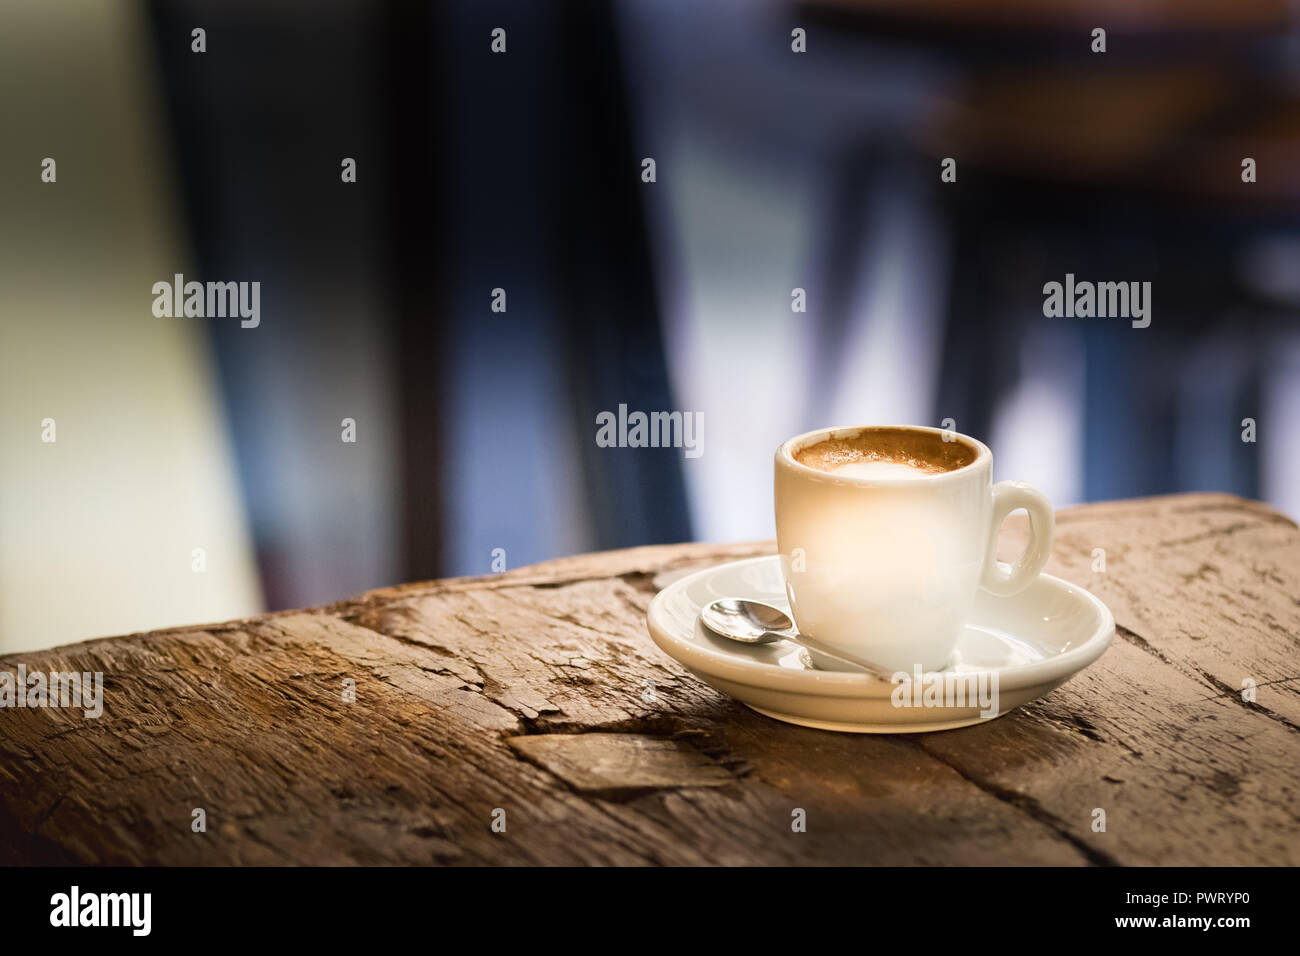 https://c8.alamy.com/comp/PWRYP0/a-small-espresso-coffee-cup-white-with-plate-and-spoon-on-a-rustic-wooden-table-outdoors-PWRYP0.jpg